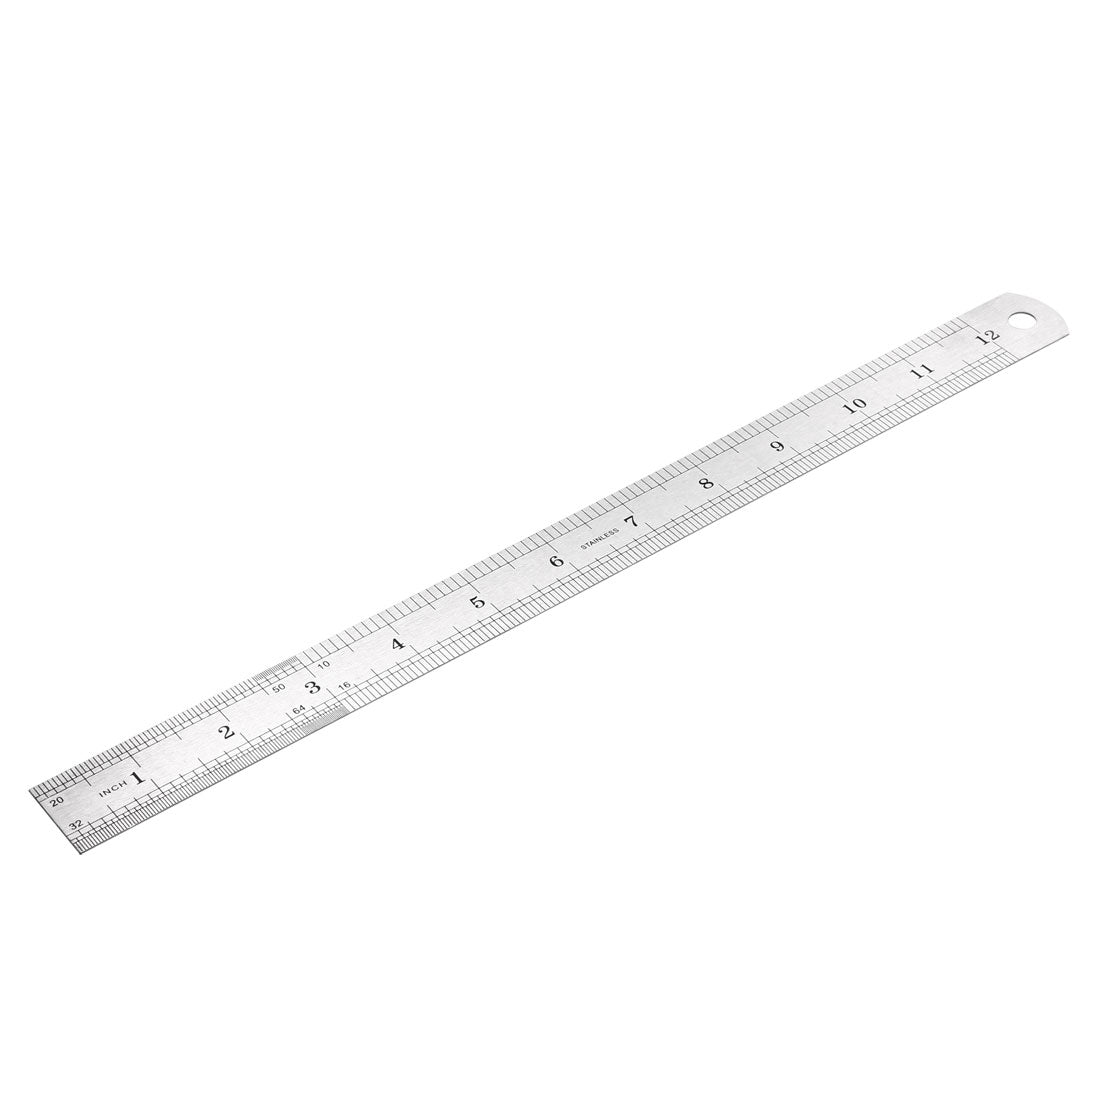 uxcell Uxcell Stainless Steel Ruler 12-inch (30cm) Straight Ruler Inches and Metric Scale